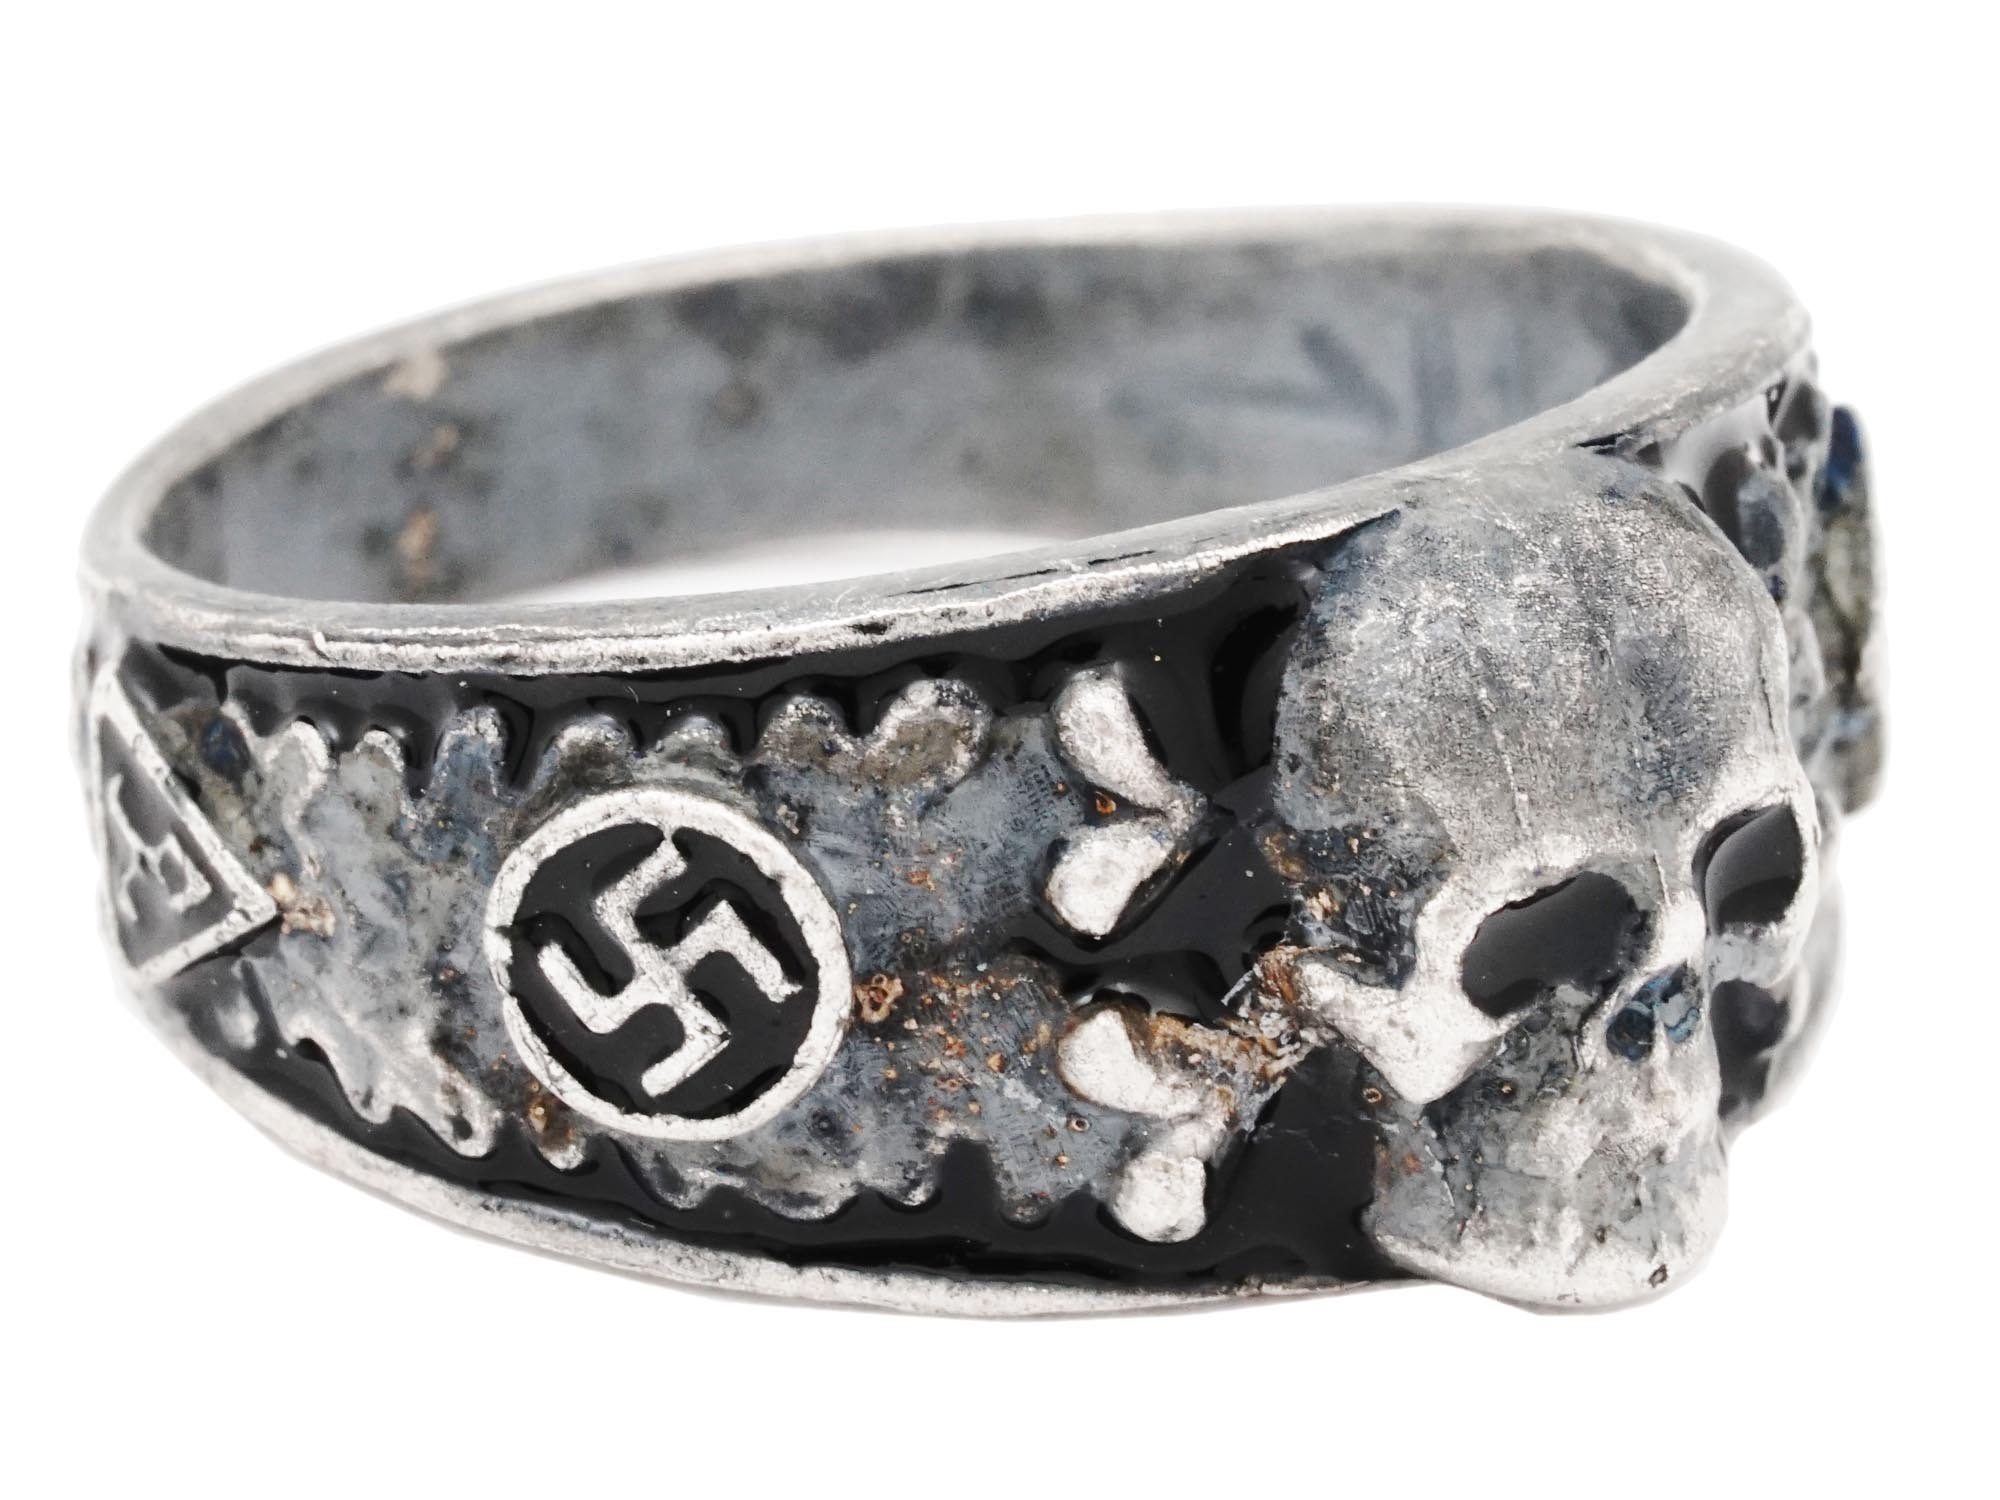 WWII NAZI GERMAN 3RD REICH AHNENERBE MEMBERS RING PIC-1